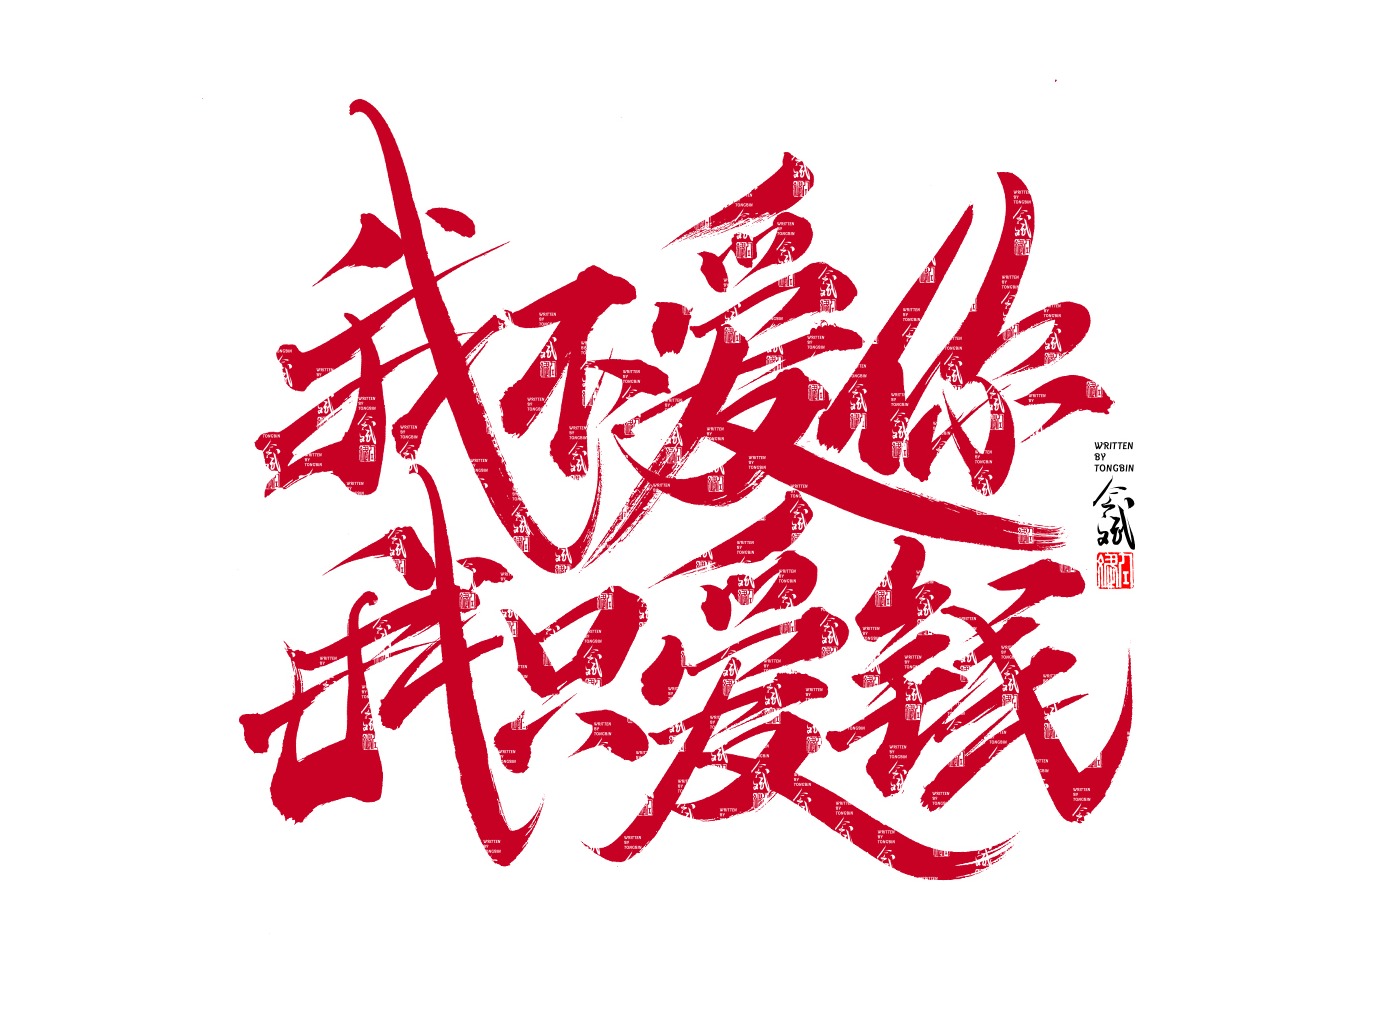 chinese fonts style